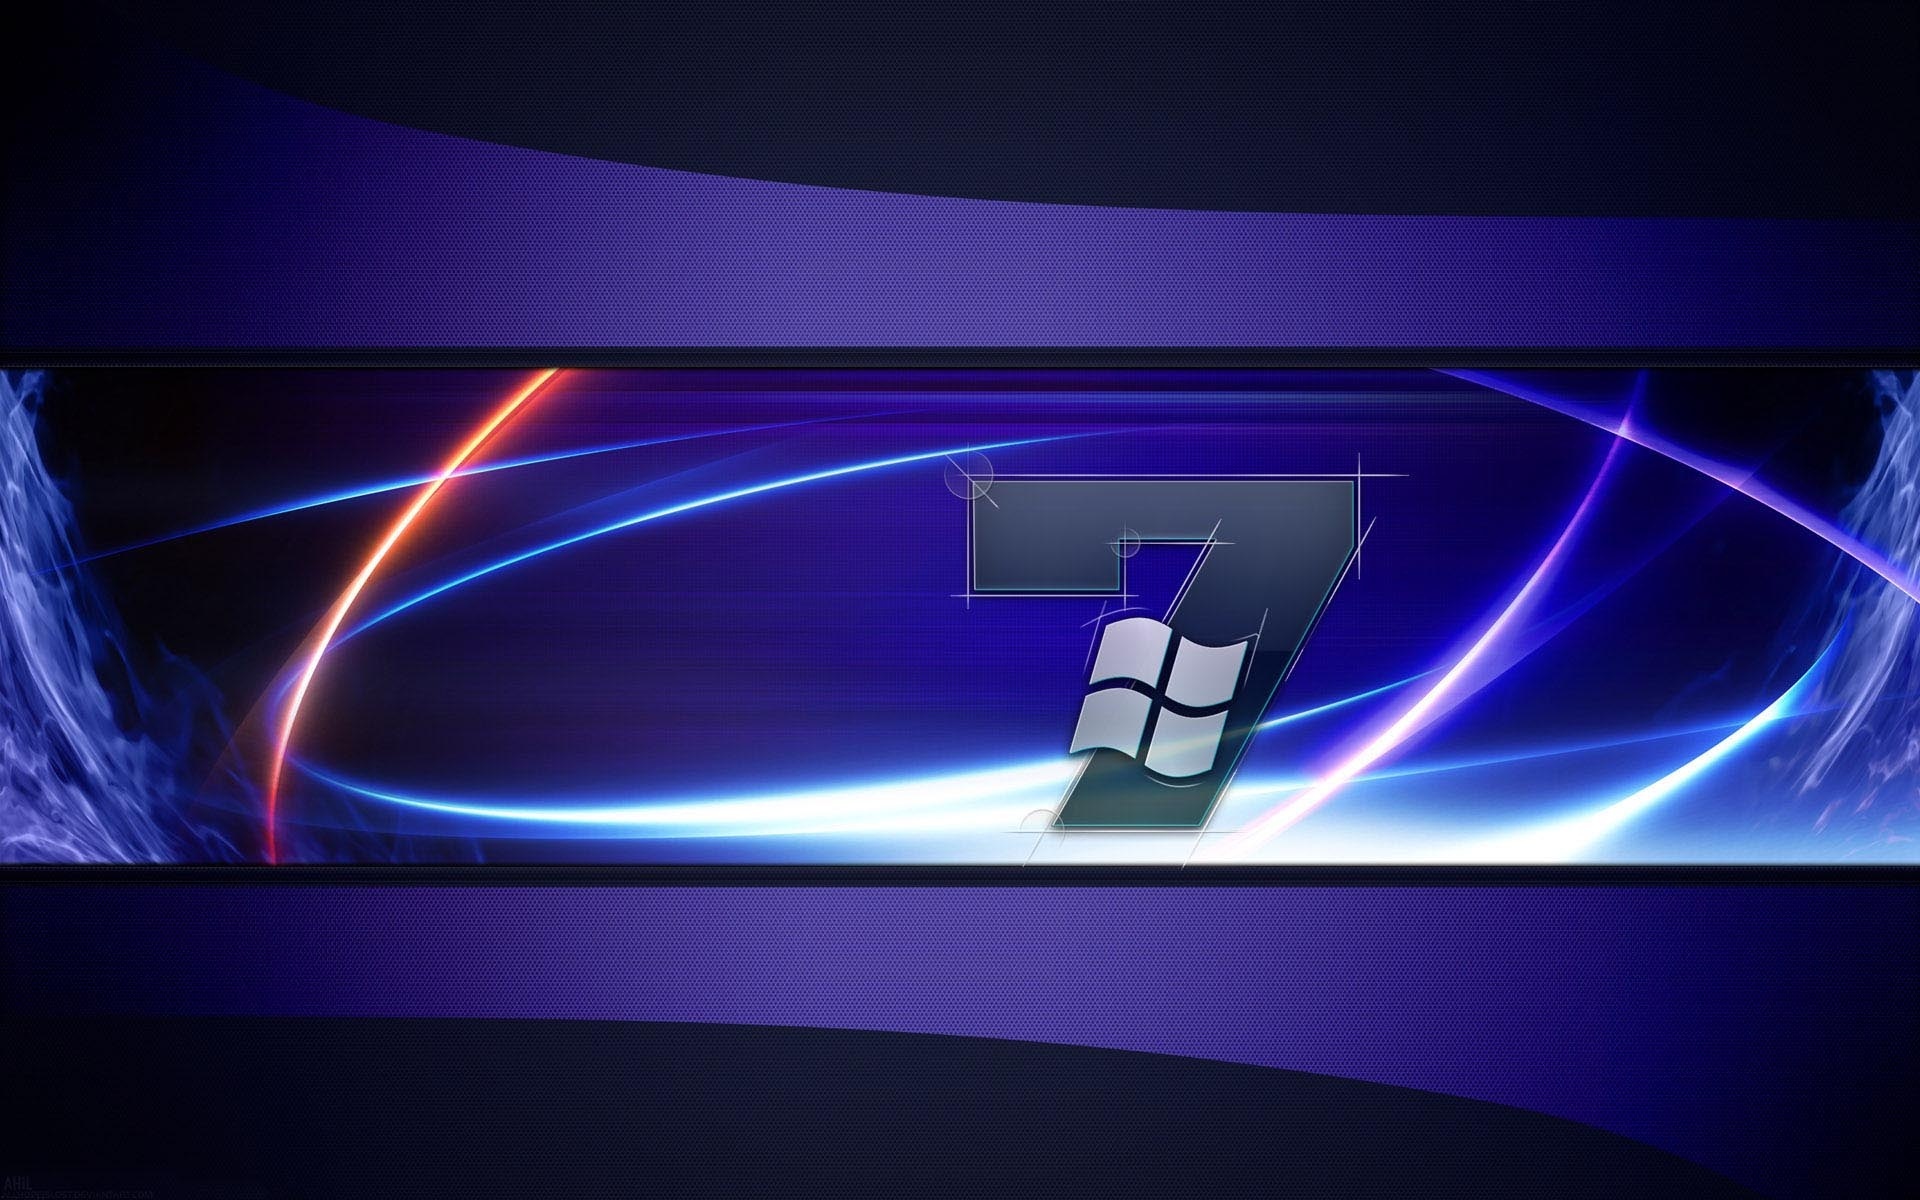 for windows 7 wallpapers and finally I found some cool wallpapers